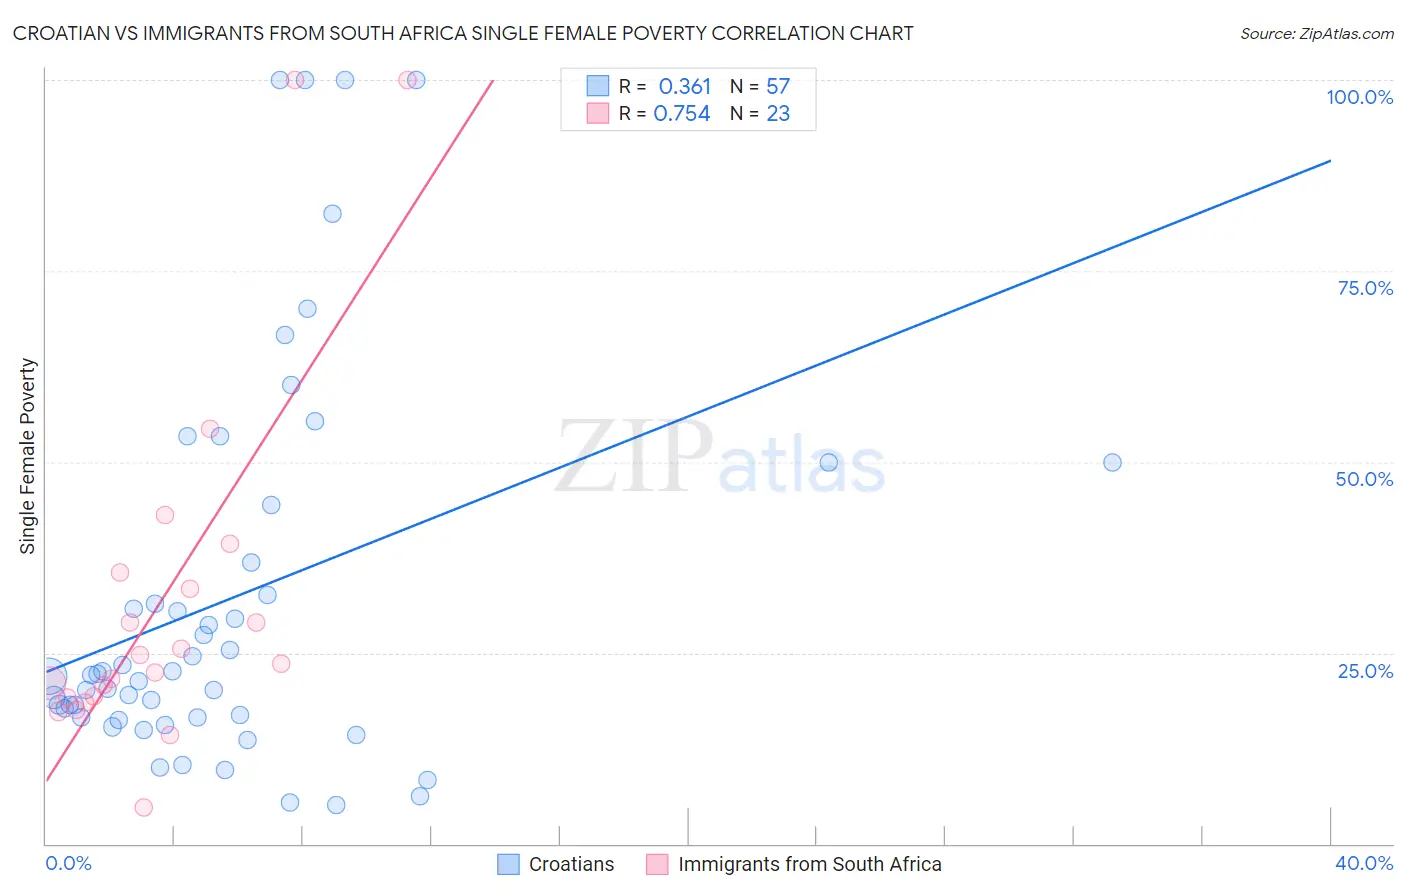 Croatian vs Immigrants from South Africa Single Female Poverty